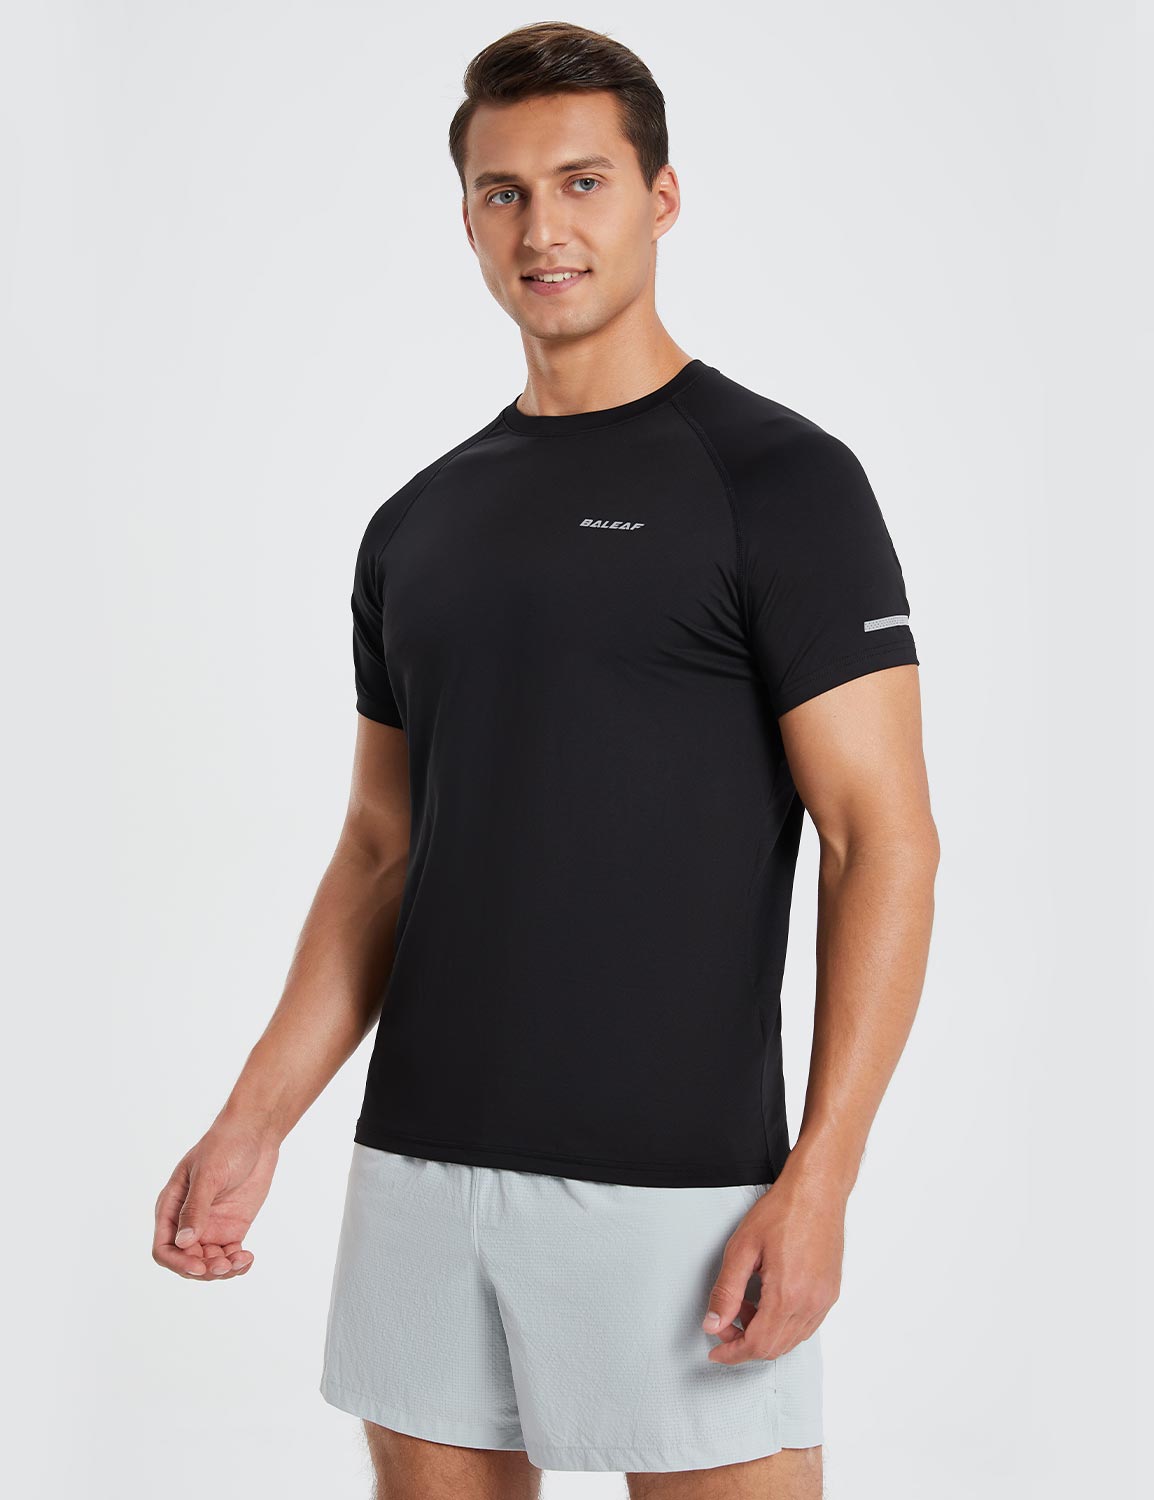 Baleaf Men's Sustainable Quick Dry Tee dbd054 Anthracite Side